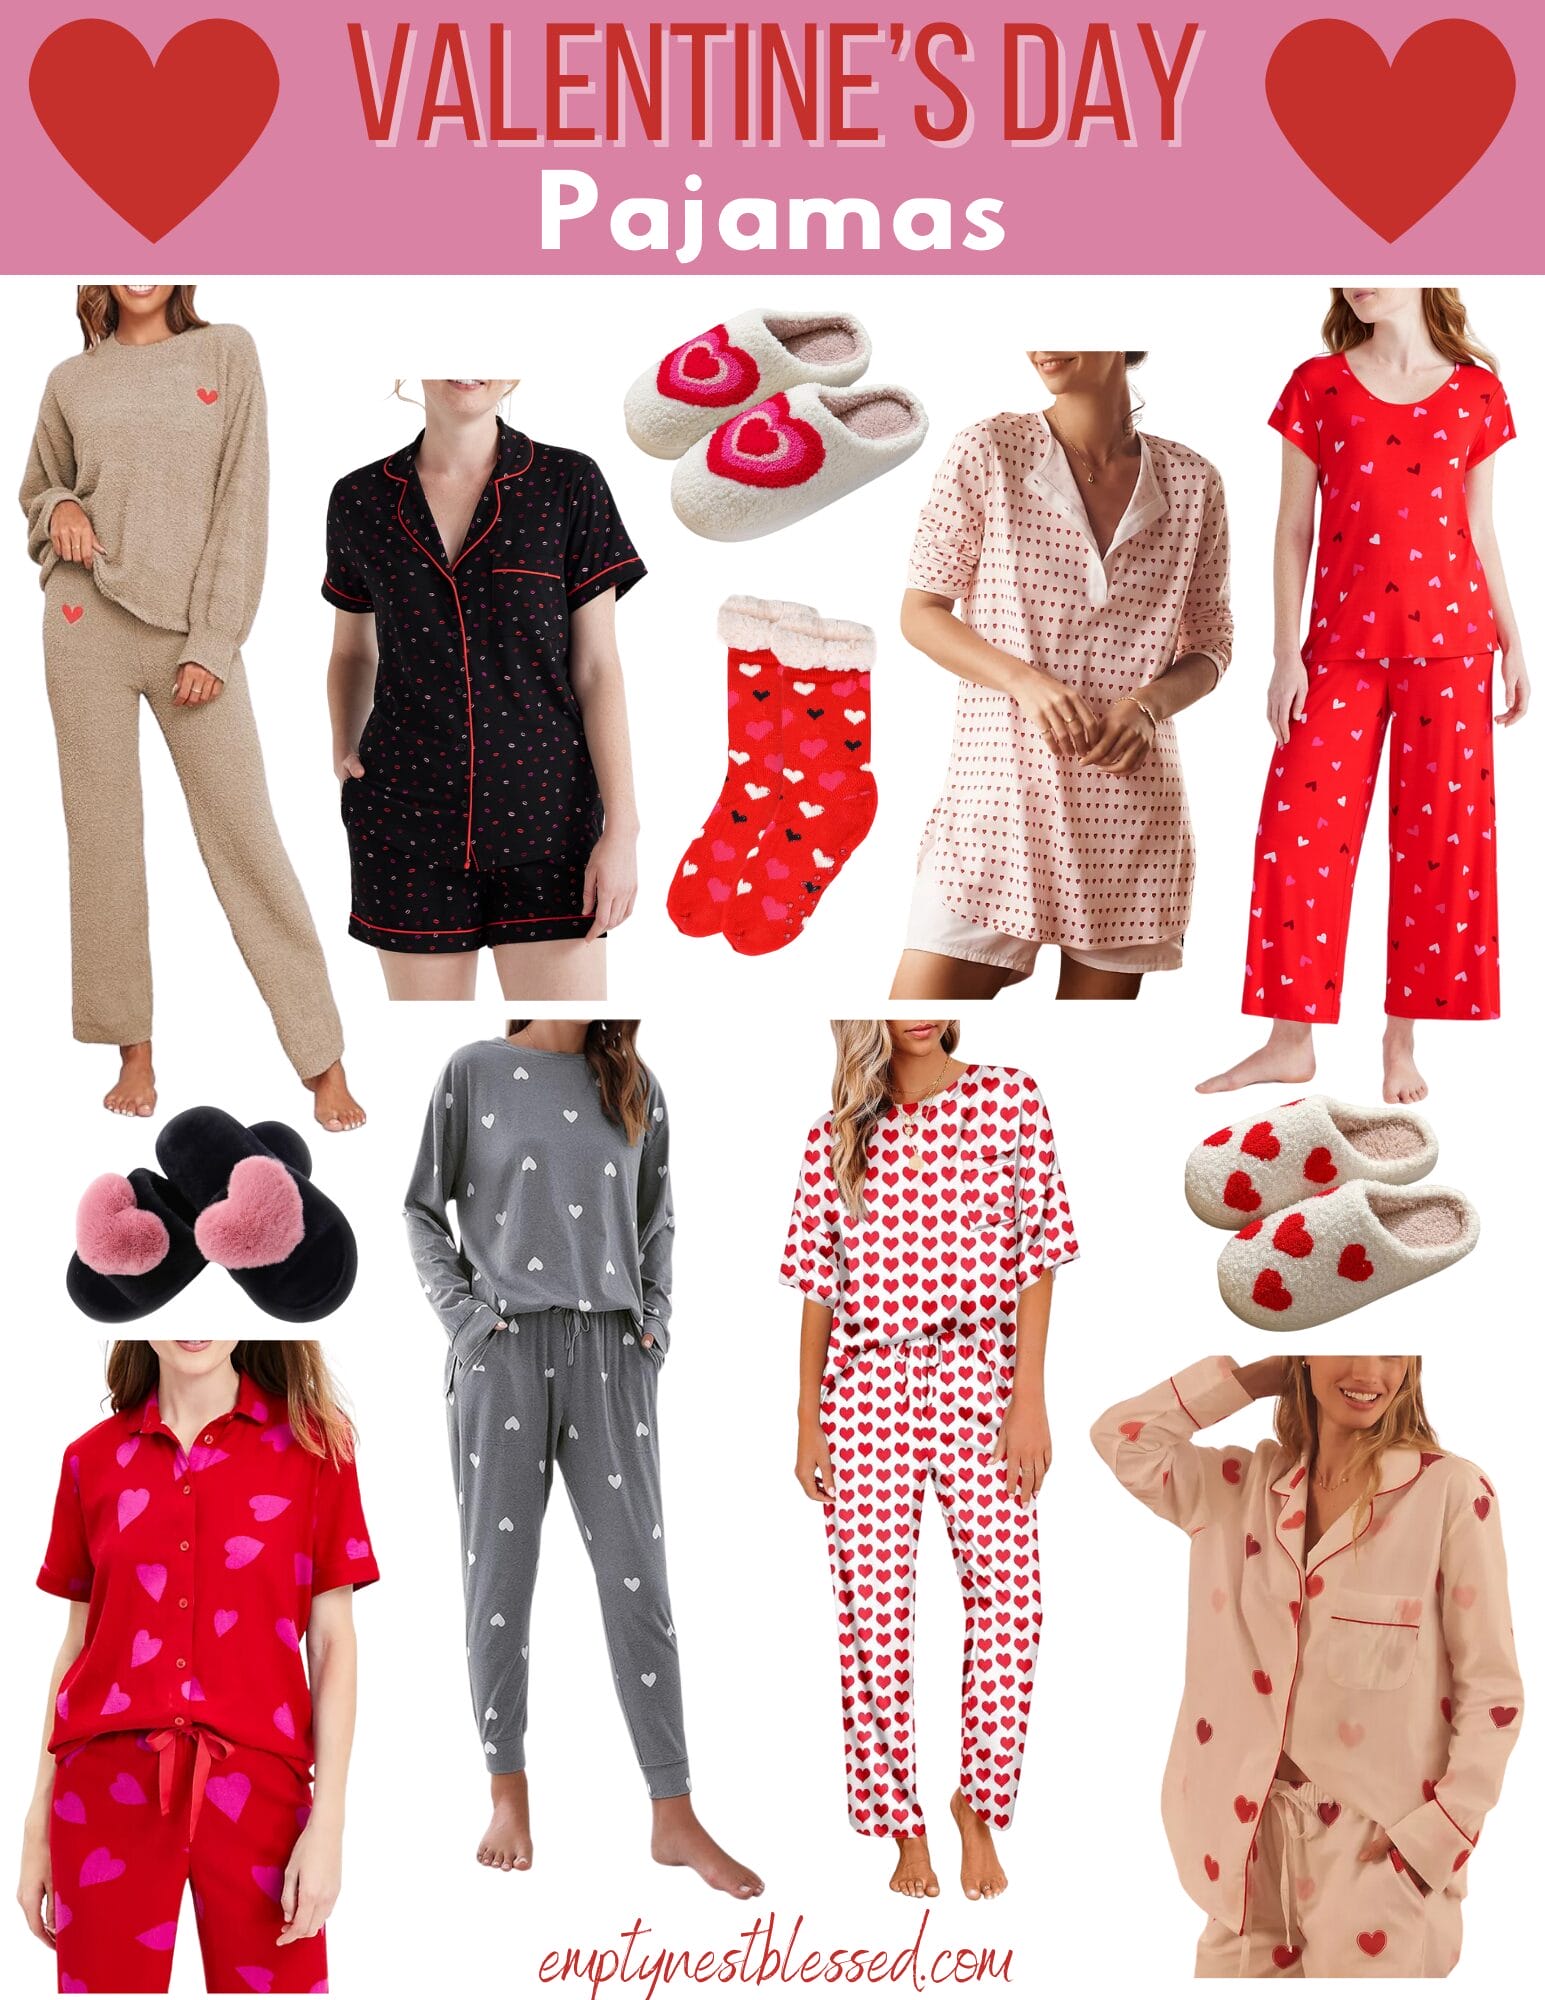 Snuggle-Worthy Valentine's Day Pajamas to Steal Your Heart